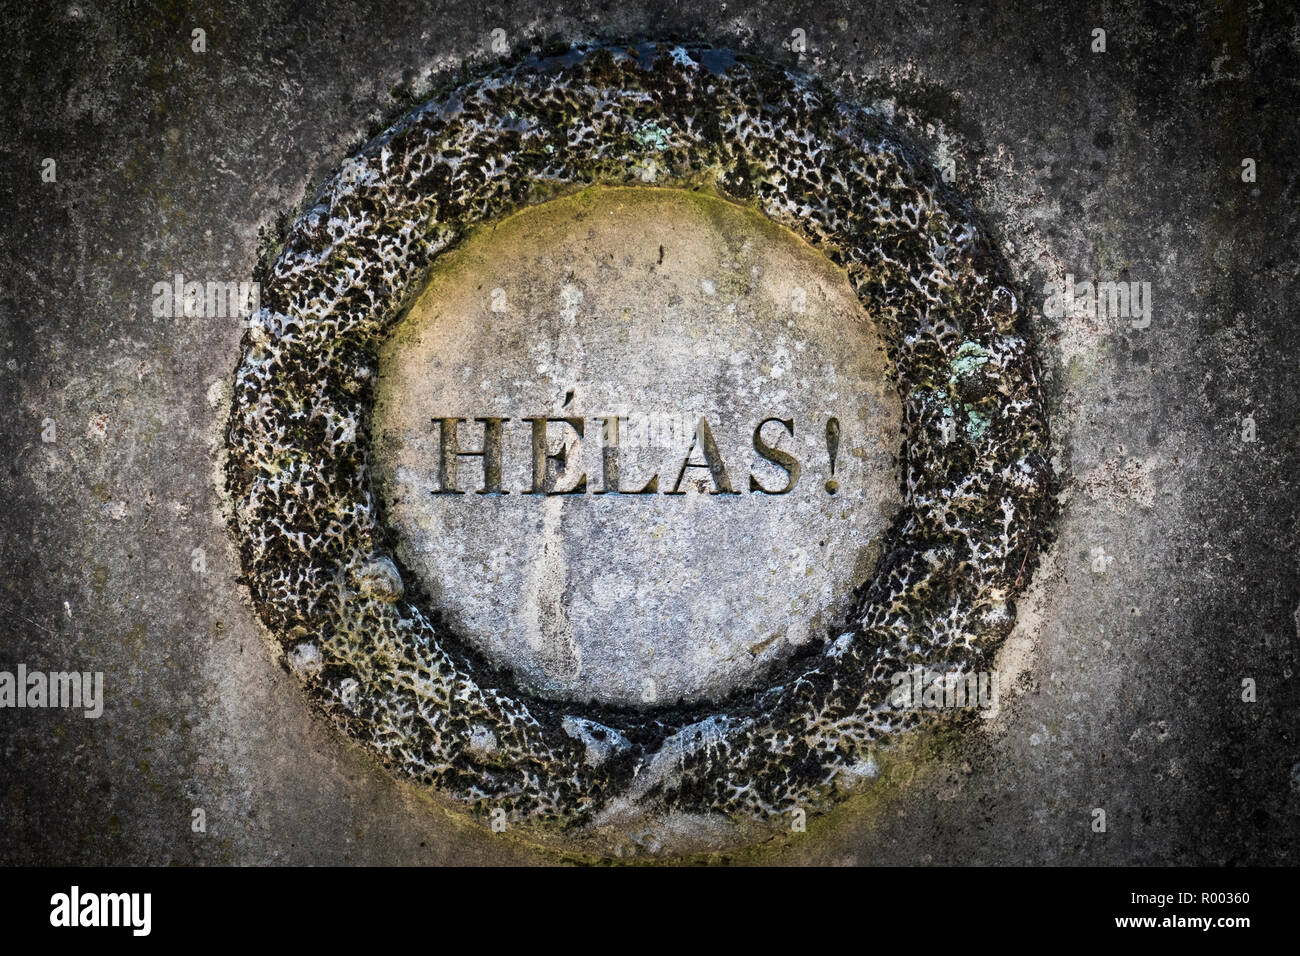 stone floral wreath with the inscription:'helas!' Stock Photo